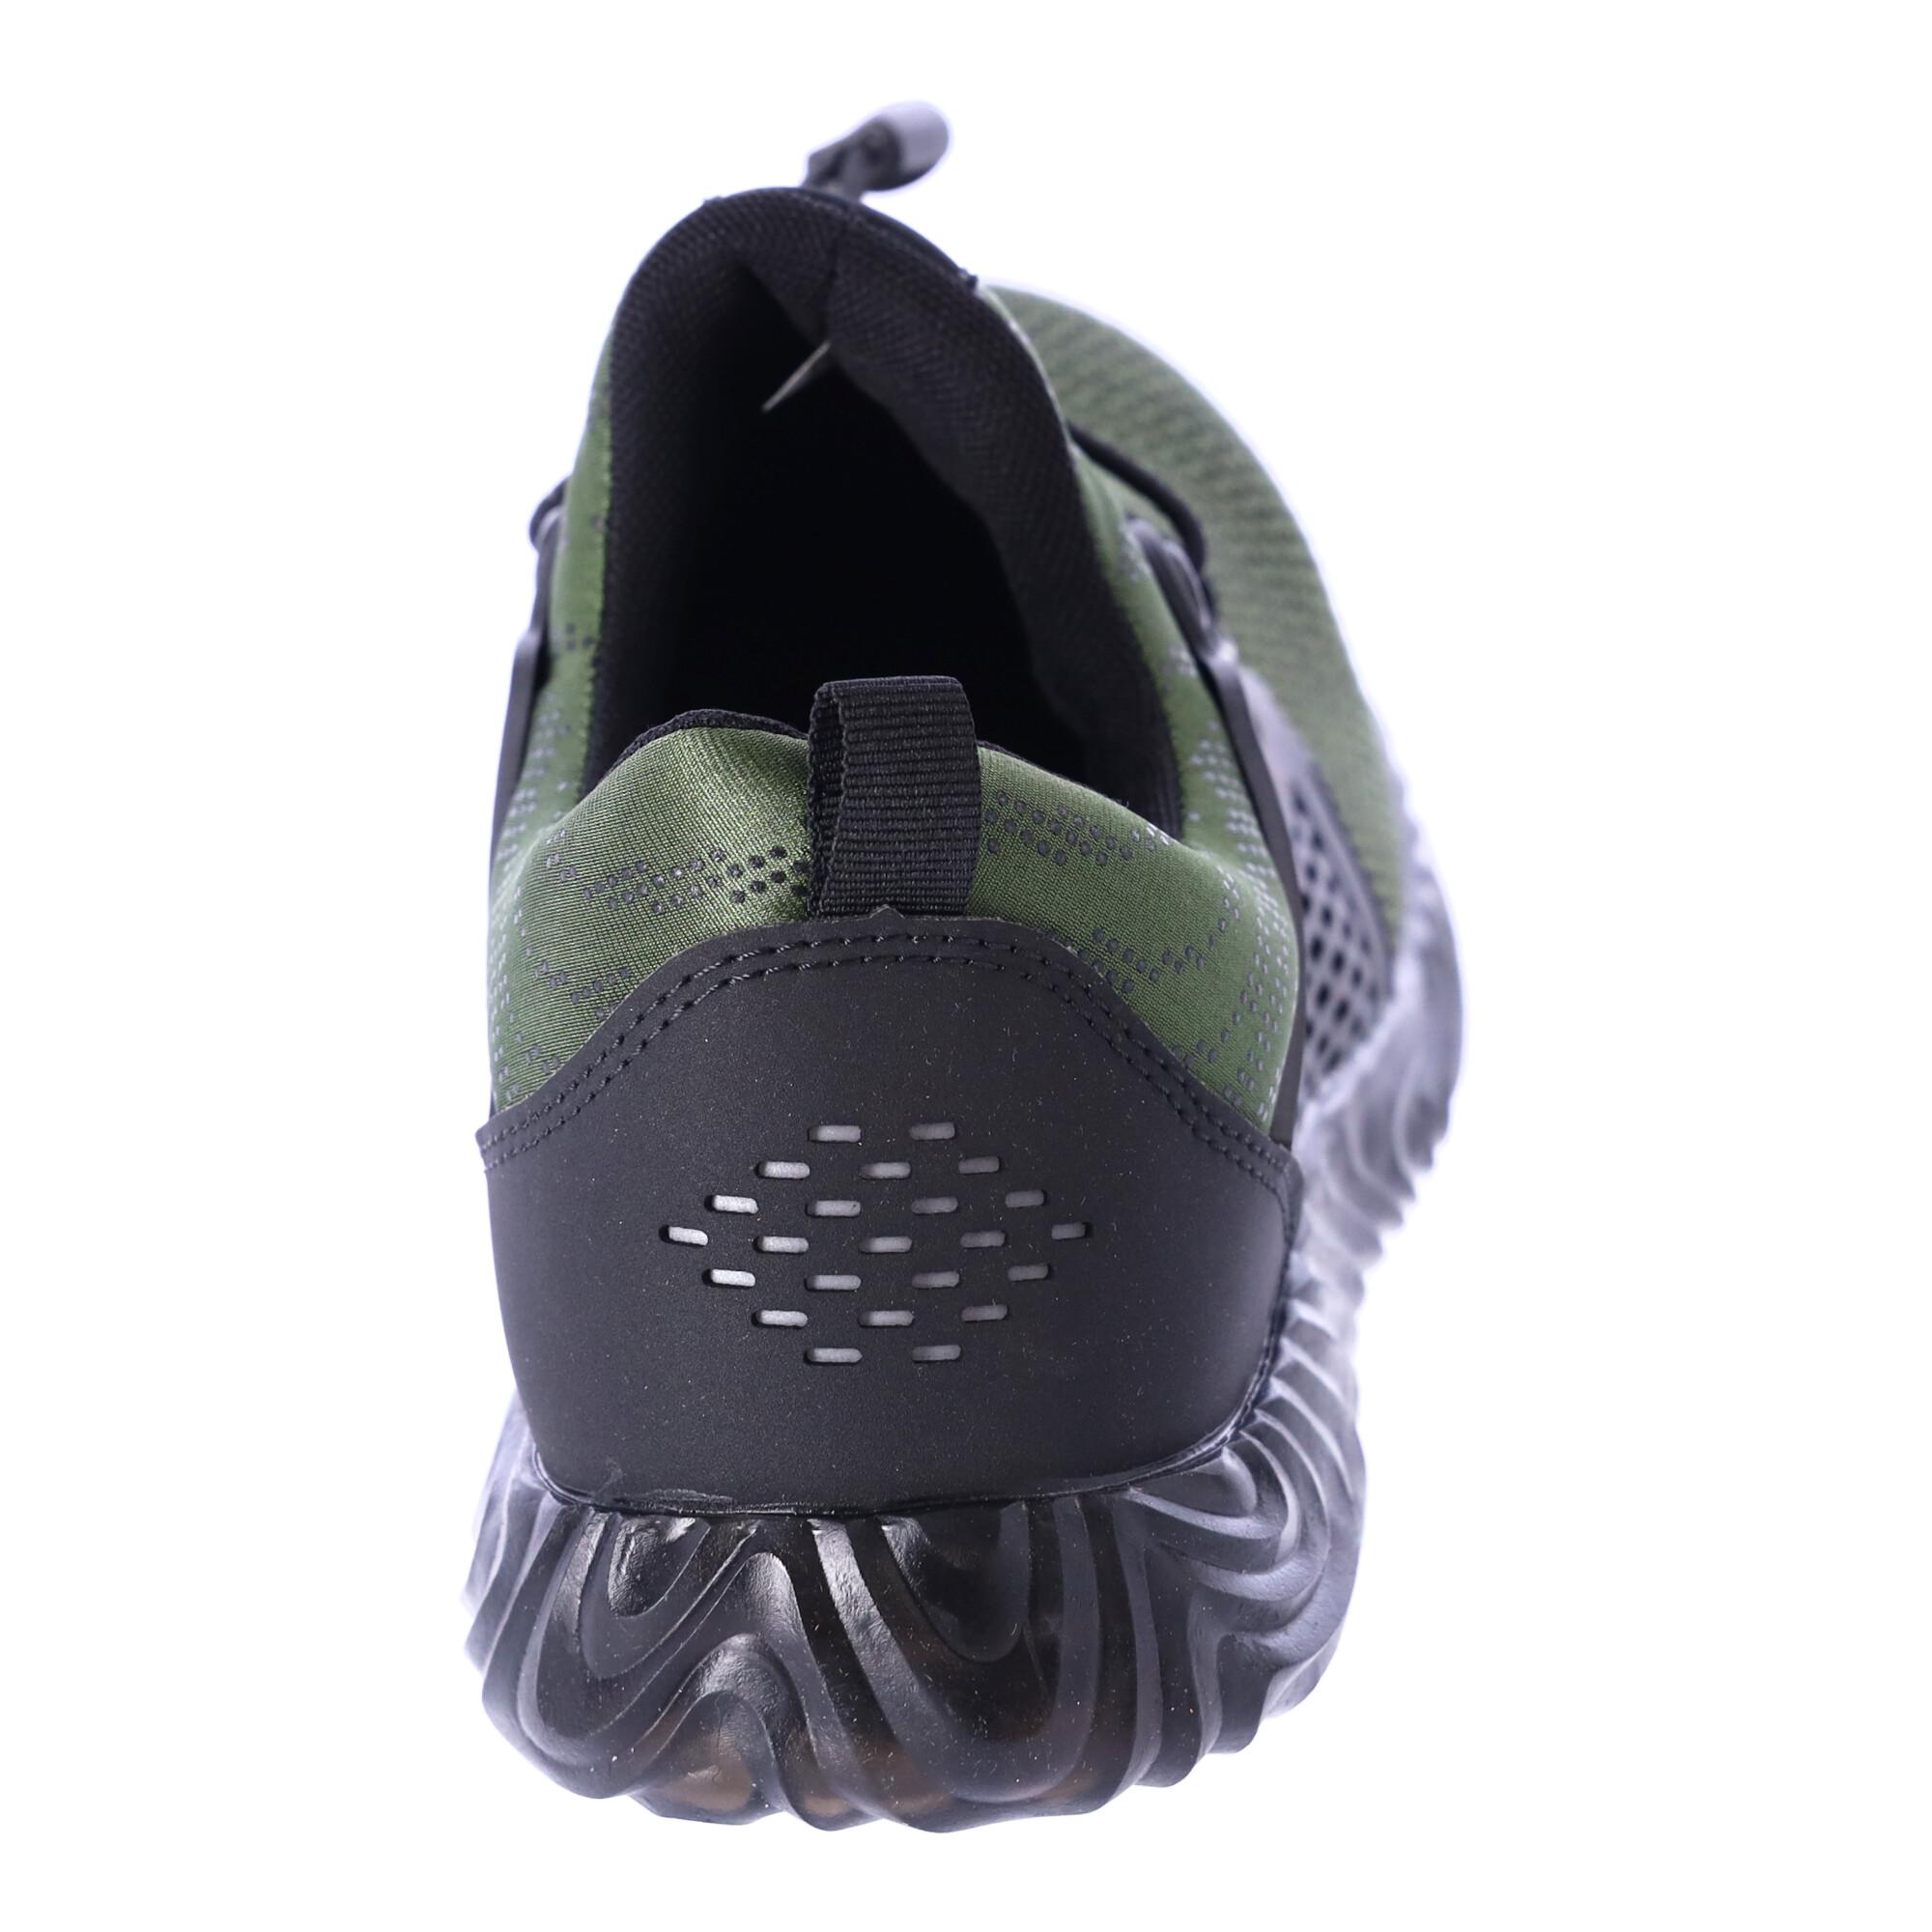 Work safety shoes "46" - green